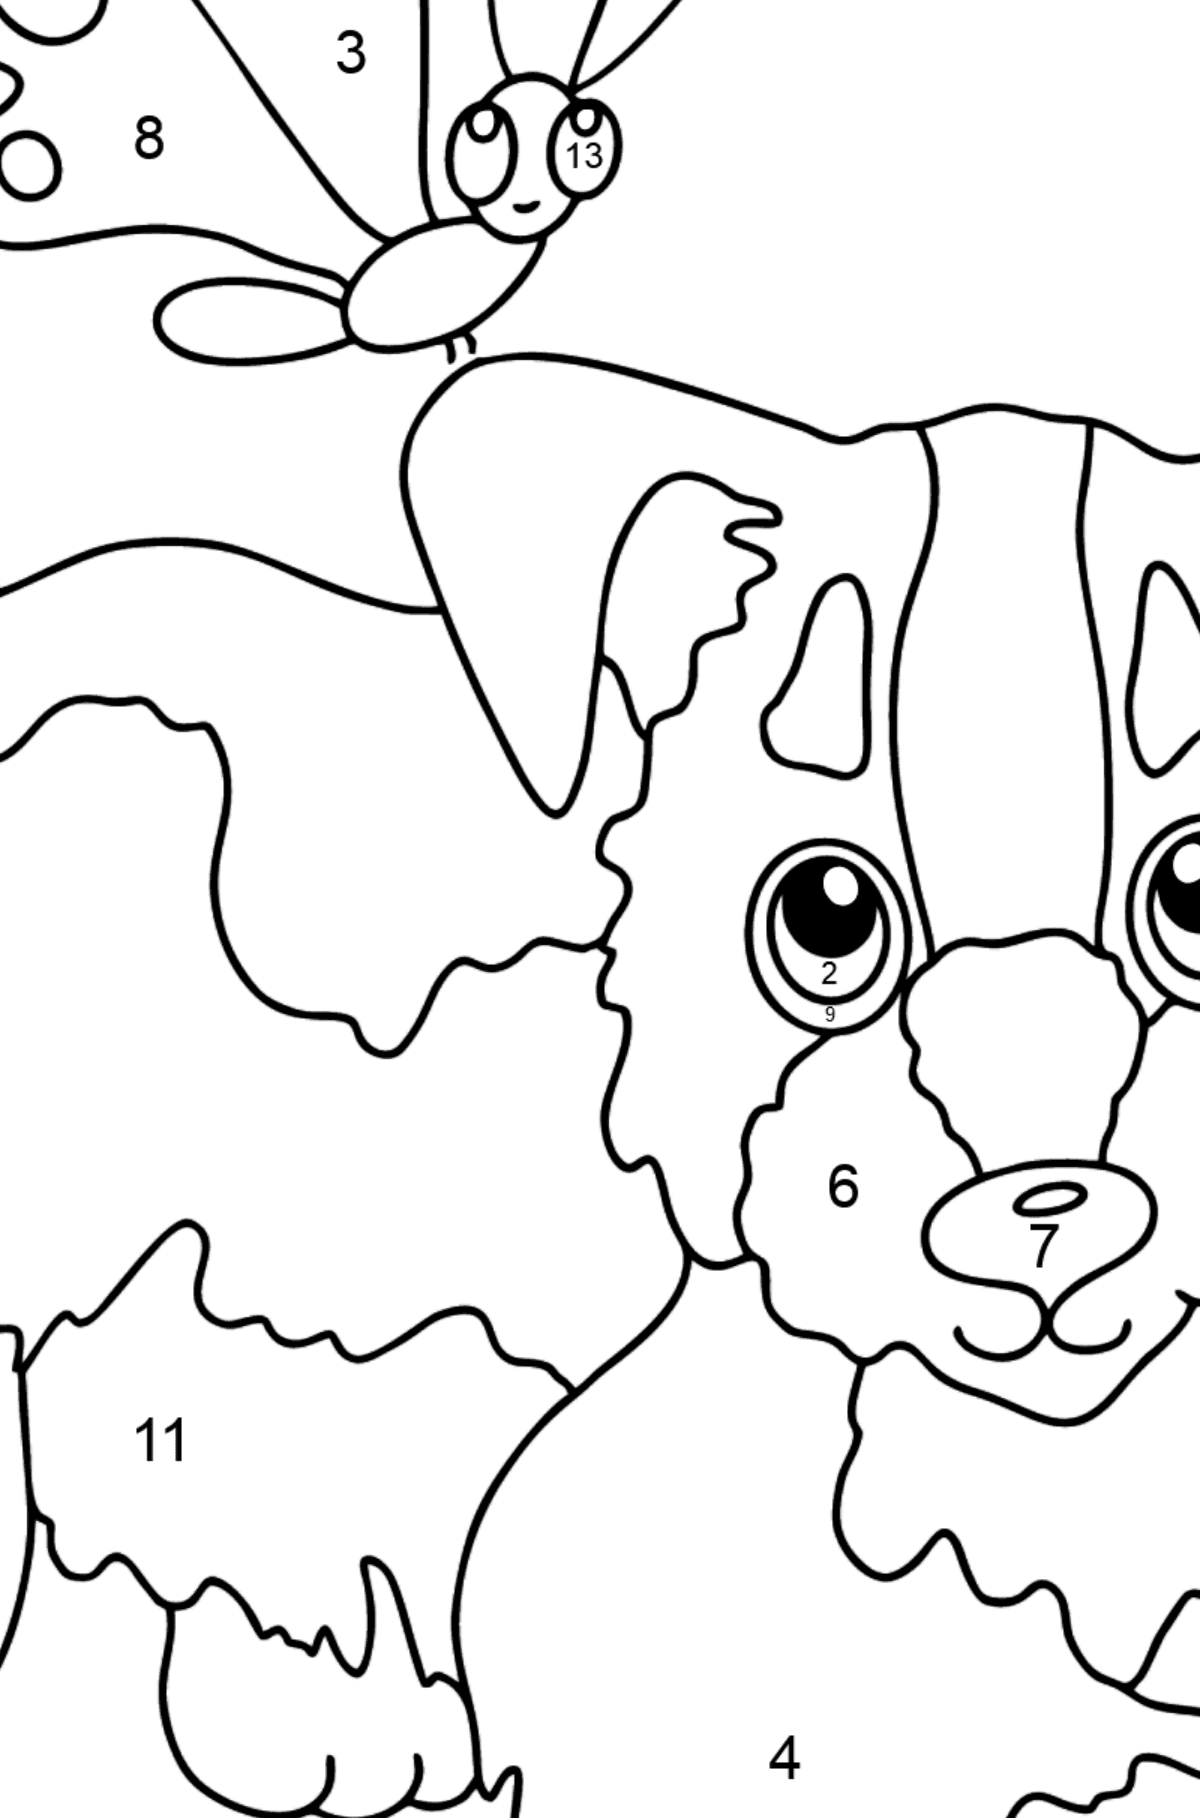 Coloring Page - A Dog is Playing with a Beautiful Butterfly - Coloring by Numbers for Kids